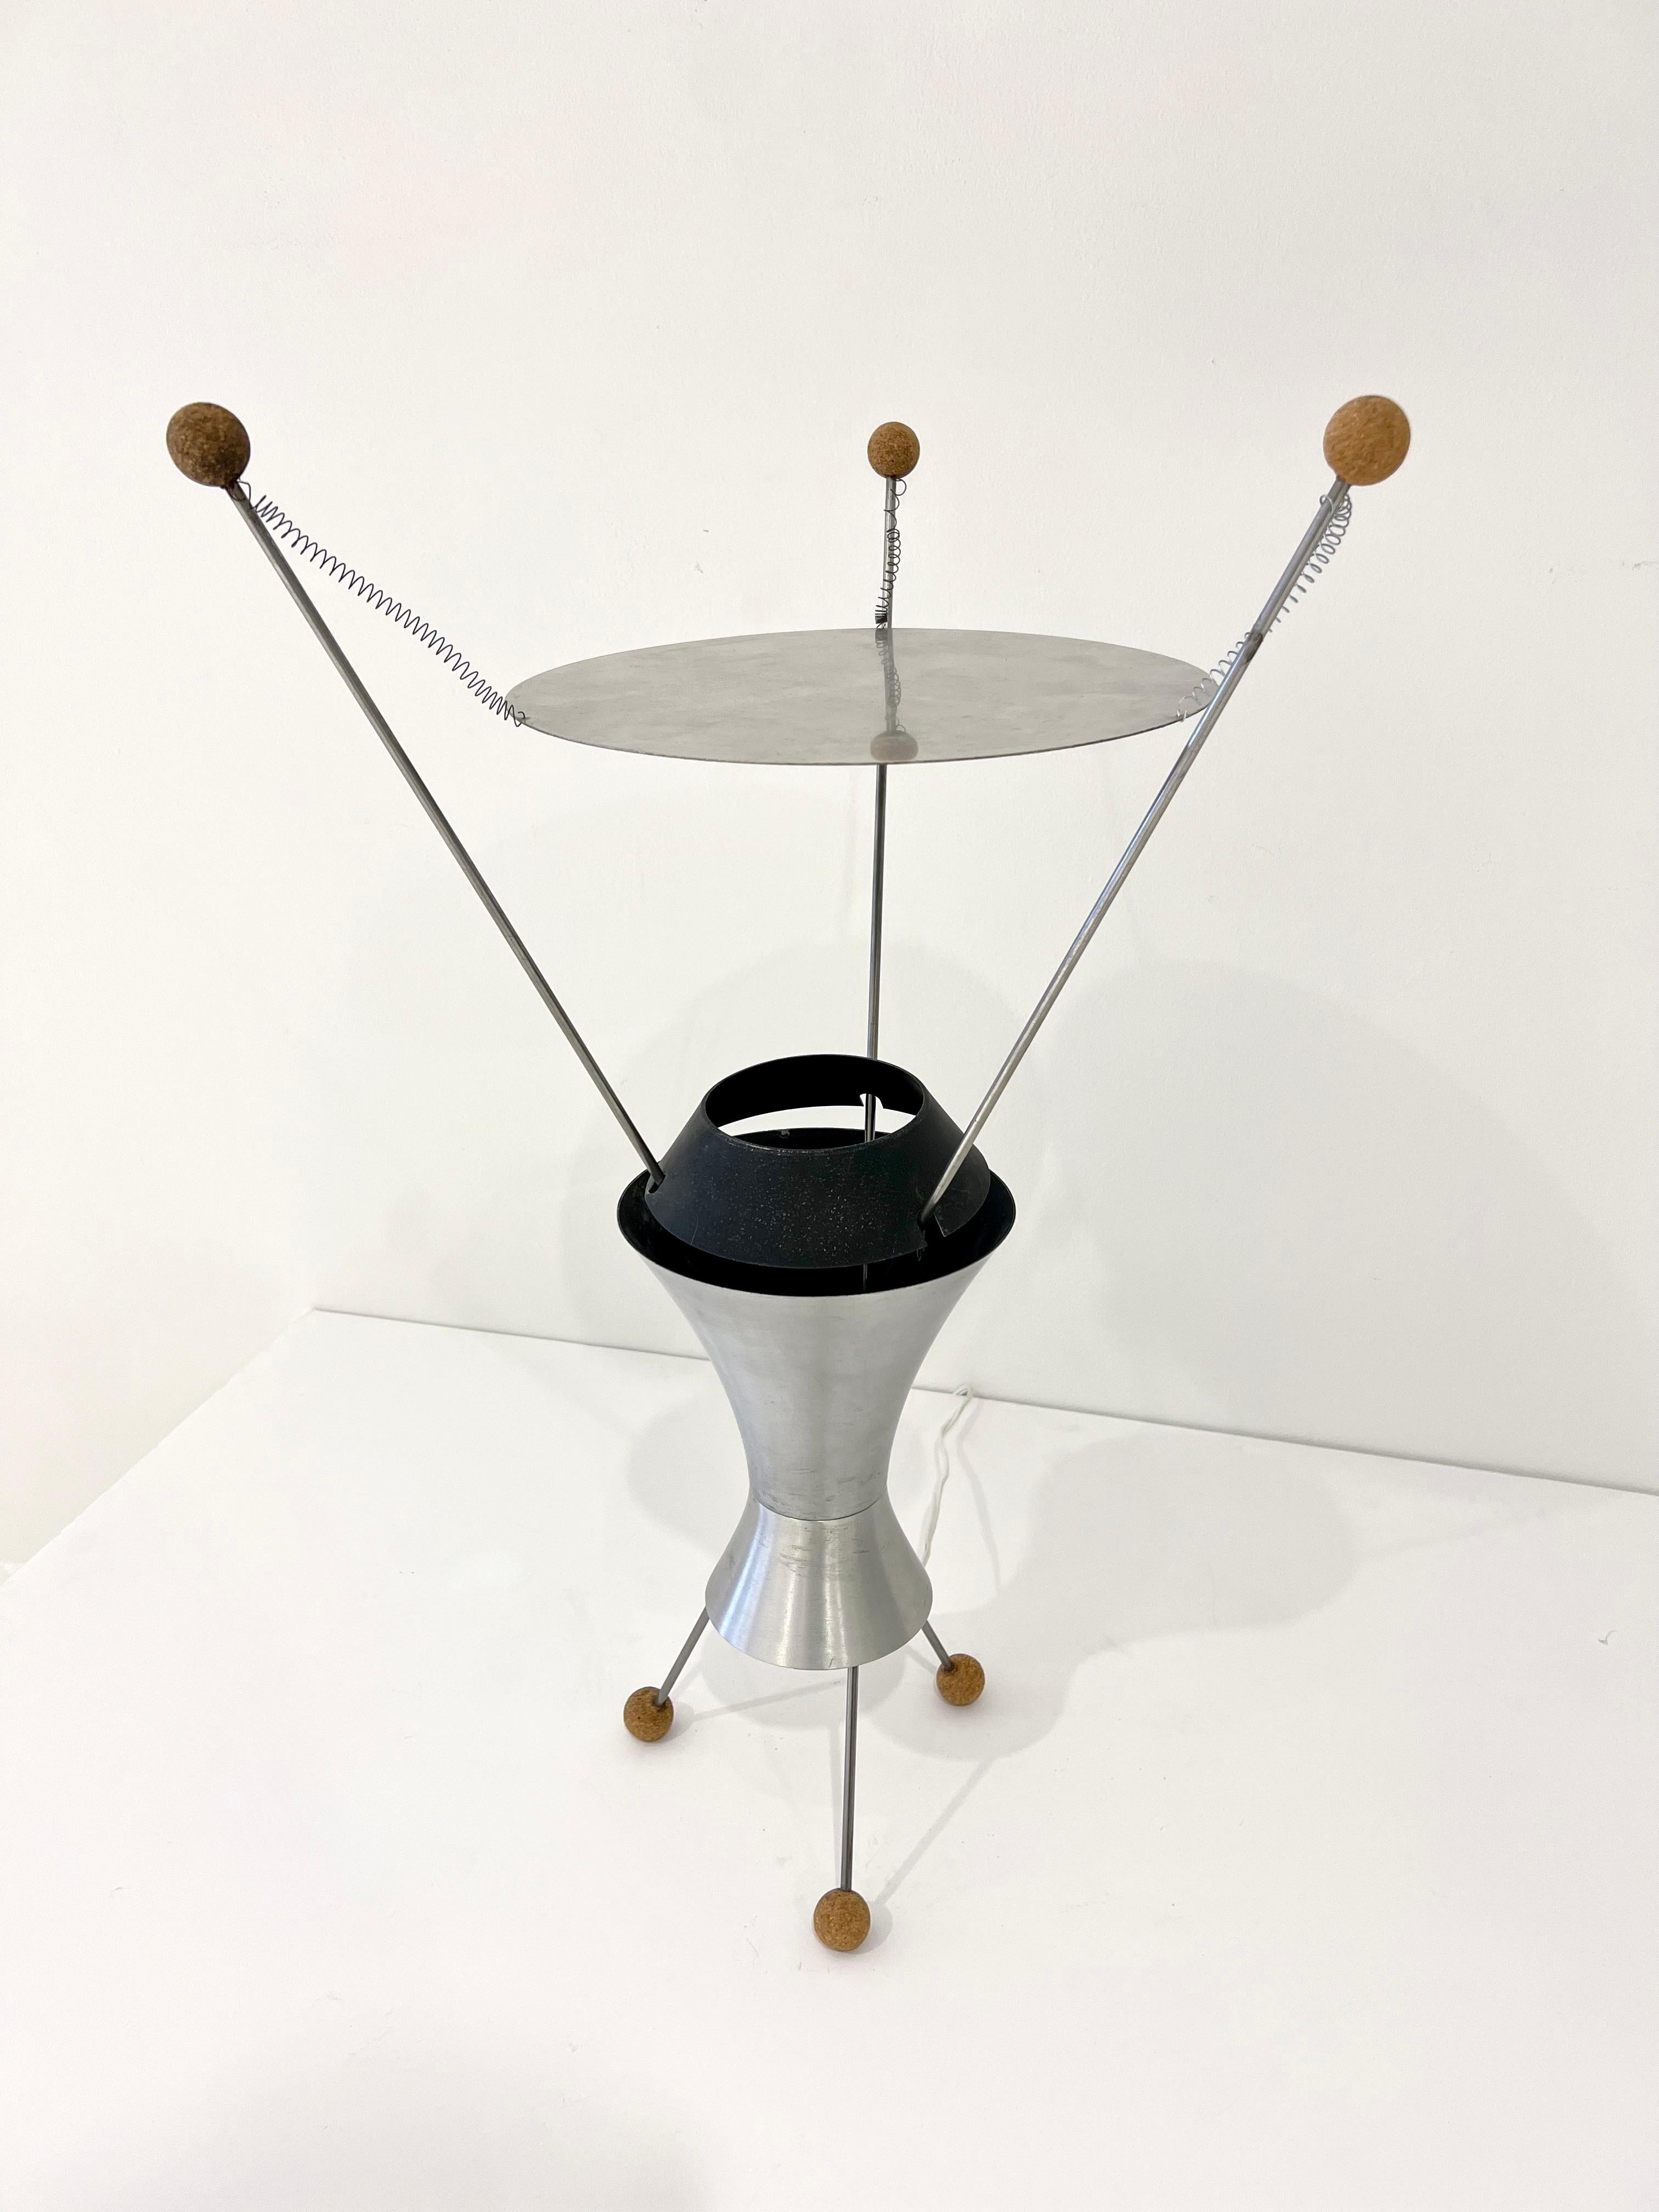 Table Lamp, model T-3-C, in spun aluminum, enameled metal, steel, cork.  Designed by James Harvey Crate, USA, 1950.
The T-3-C lamp received Third Prize in MoMA’s Low-Cost Lighting Competition of 1951 and was shown in the New Lamps exhibition at the